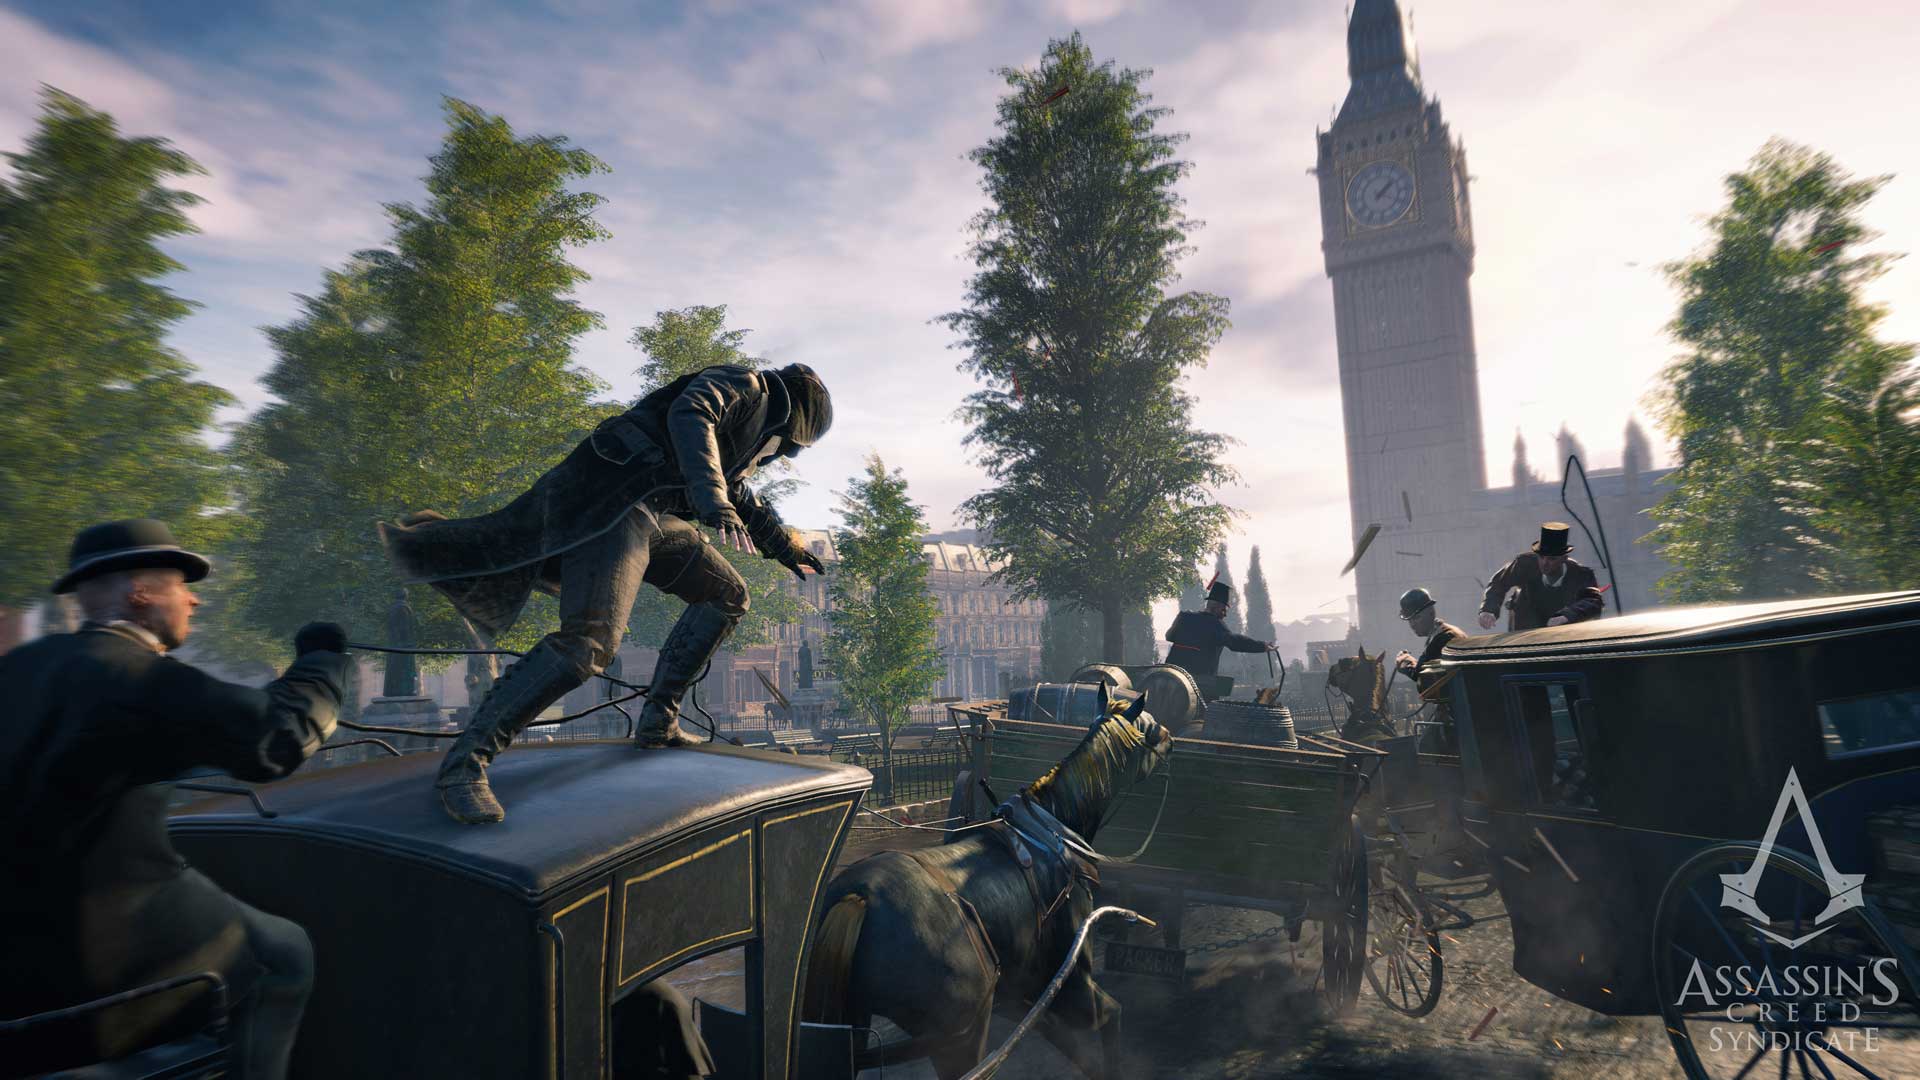 Assassin's Creed Syndicate Officially Announced By Ubisoft